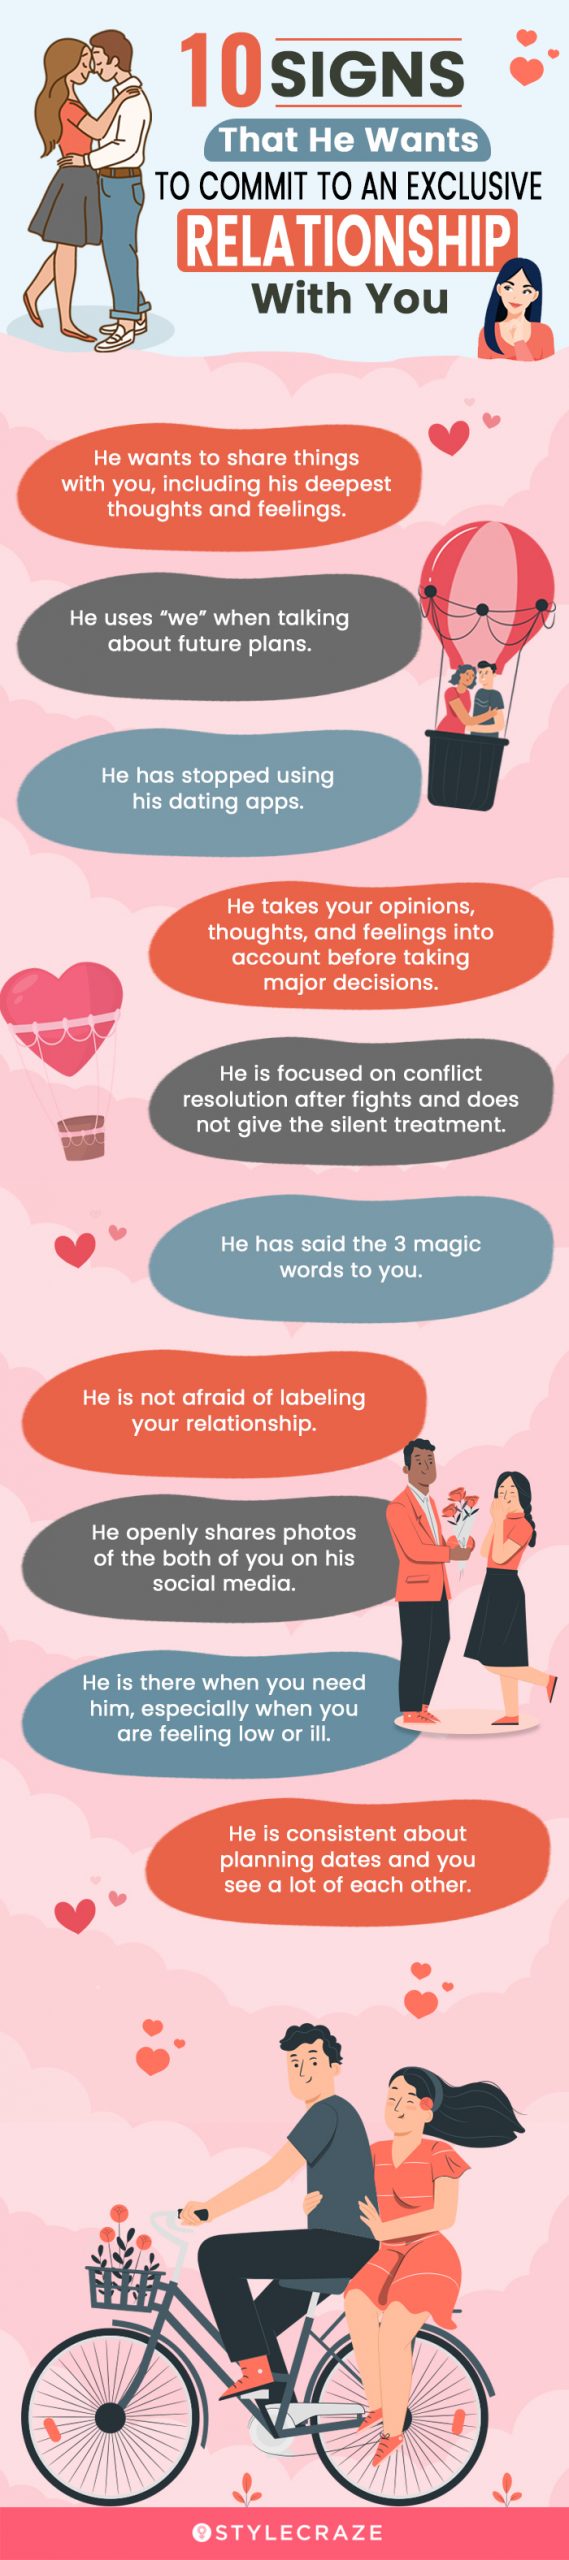 10 signs that he wants to commit to an exclusive relationship with you [infographic]